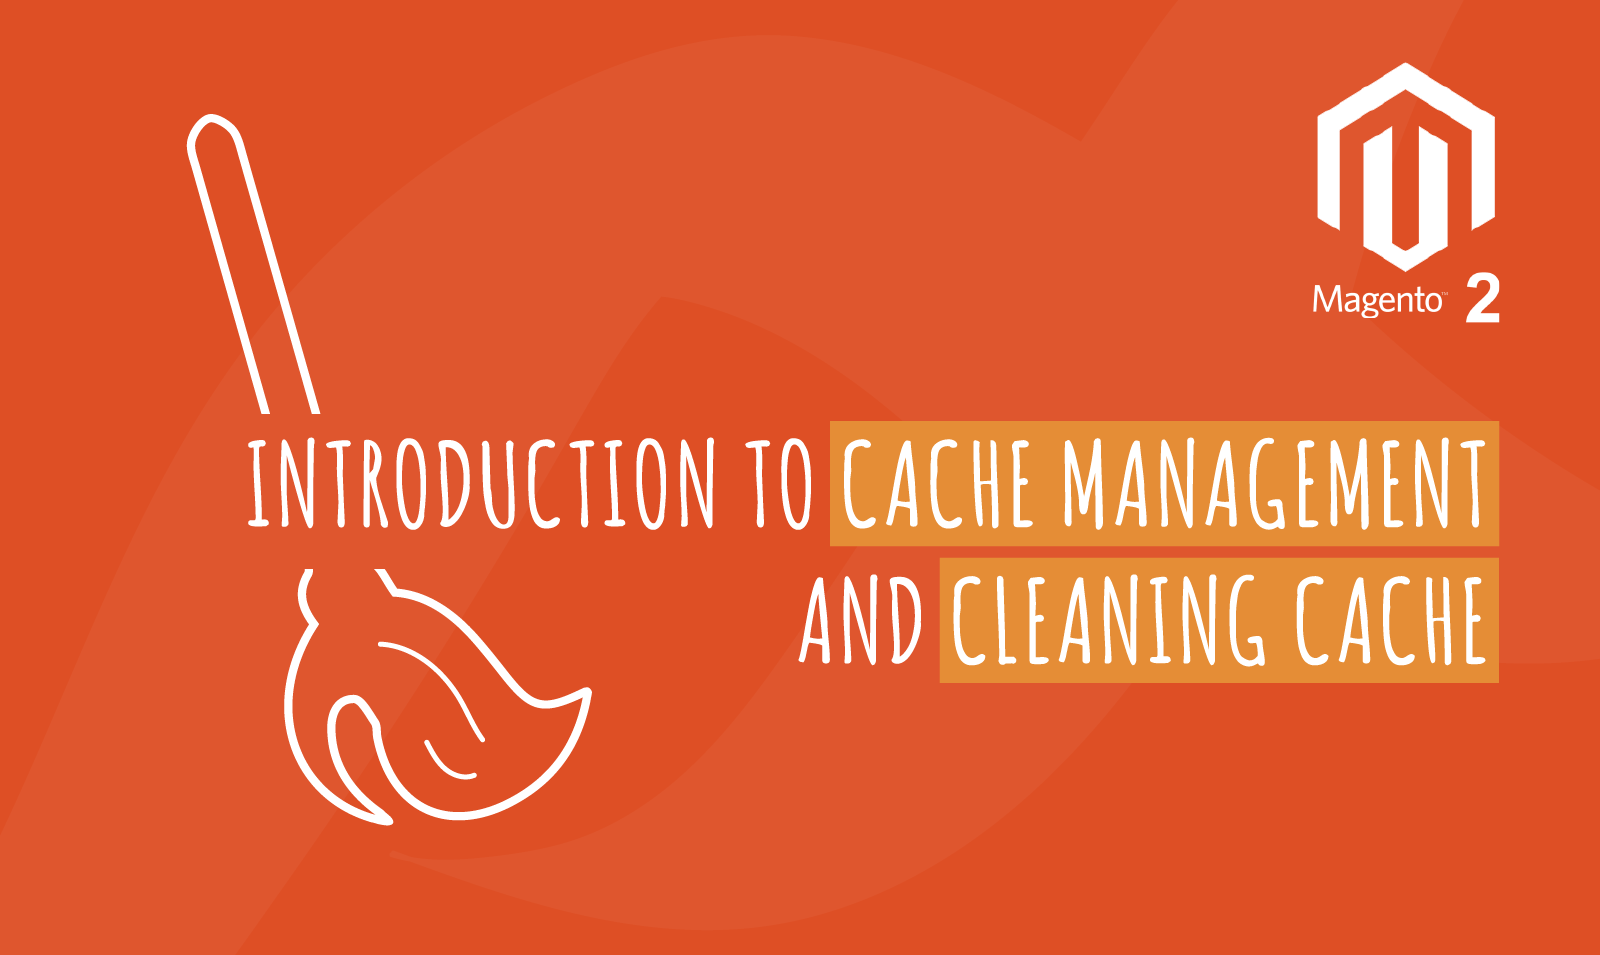 INTRODUCTION TO CACHE MANAGEMENT AND CLEANING CACHE IN MAGENTO